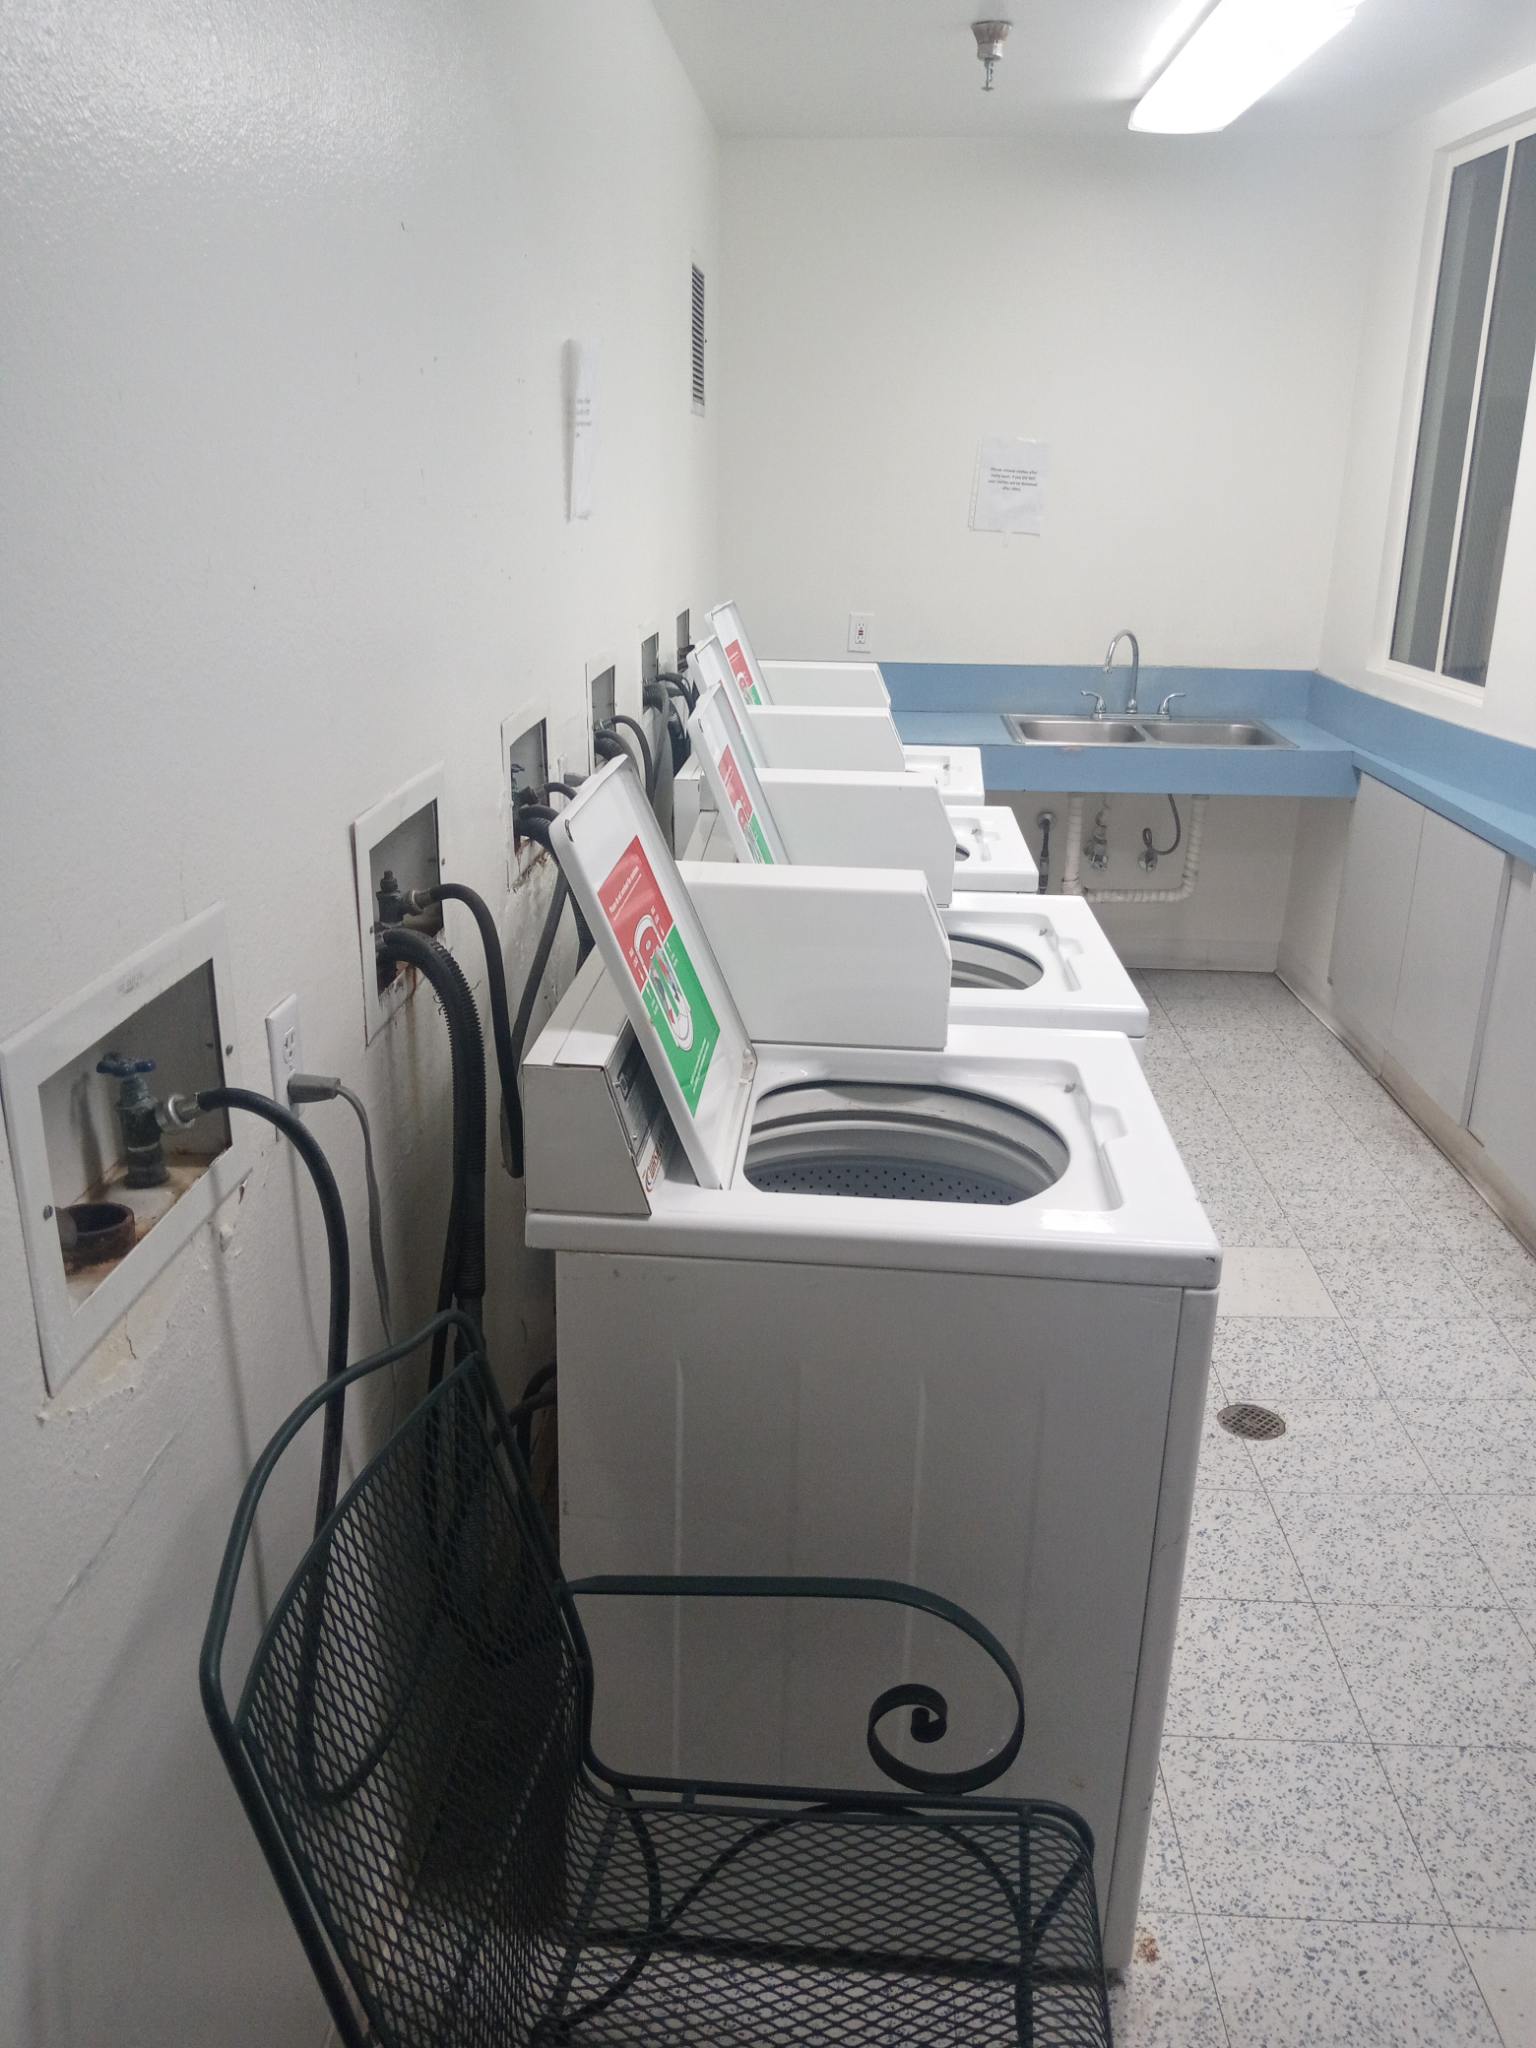 Laundry room. Four washing machines are lined against the wall. There is a sink and a chair.